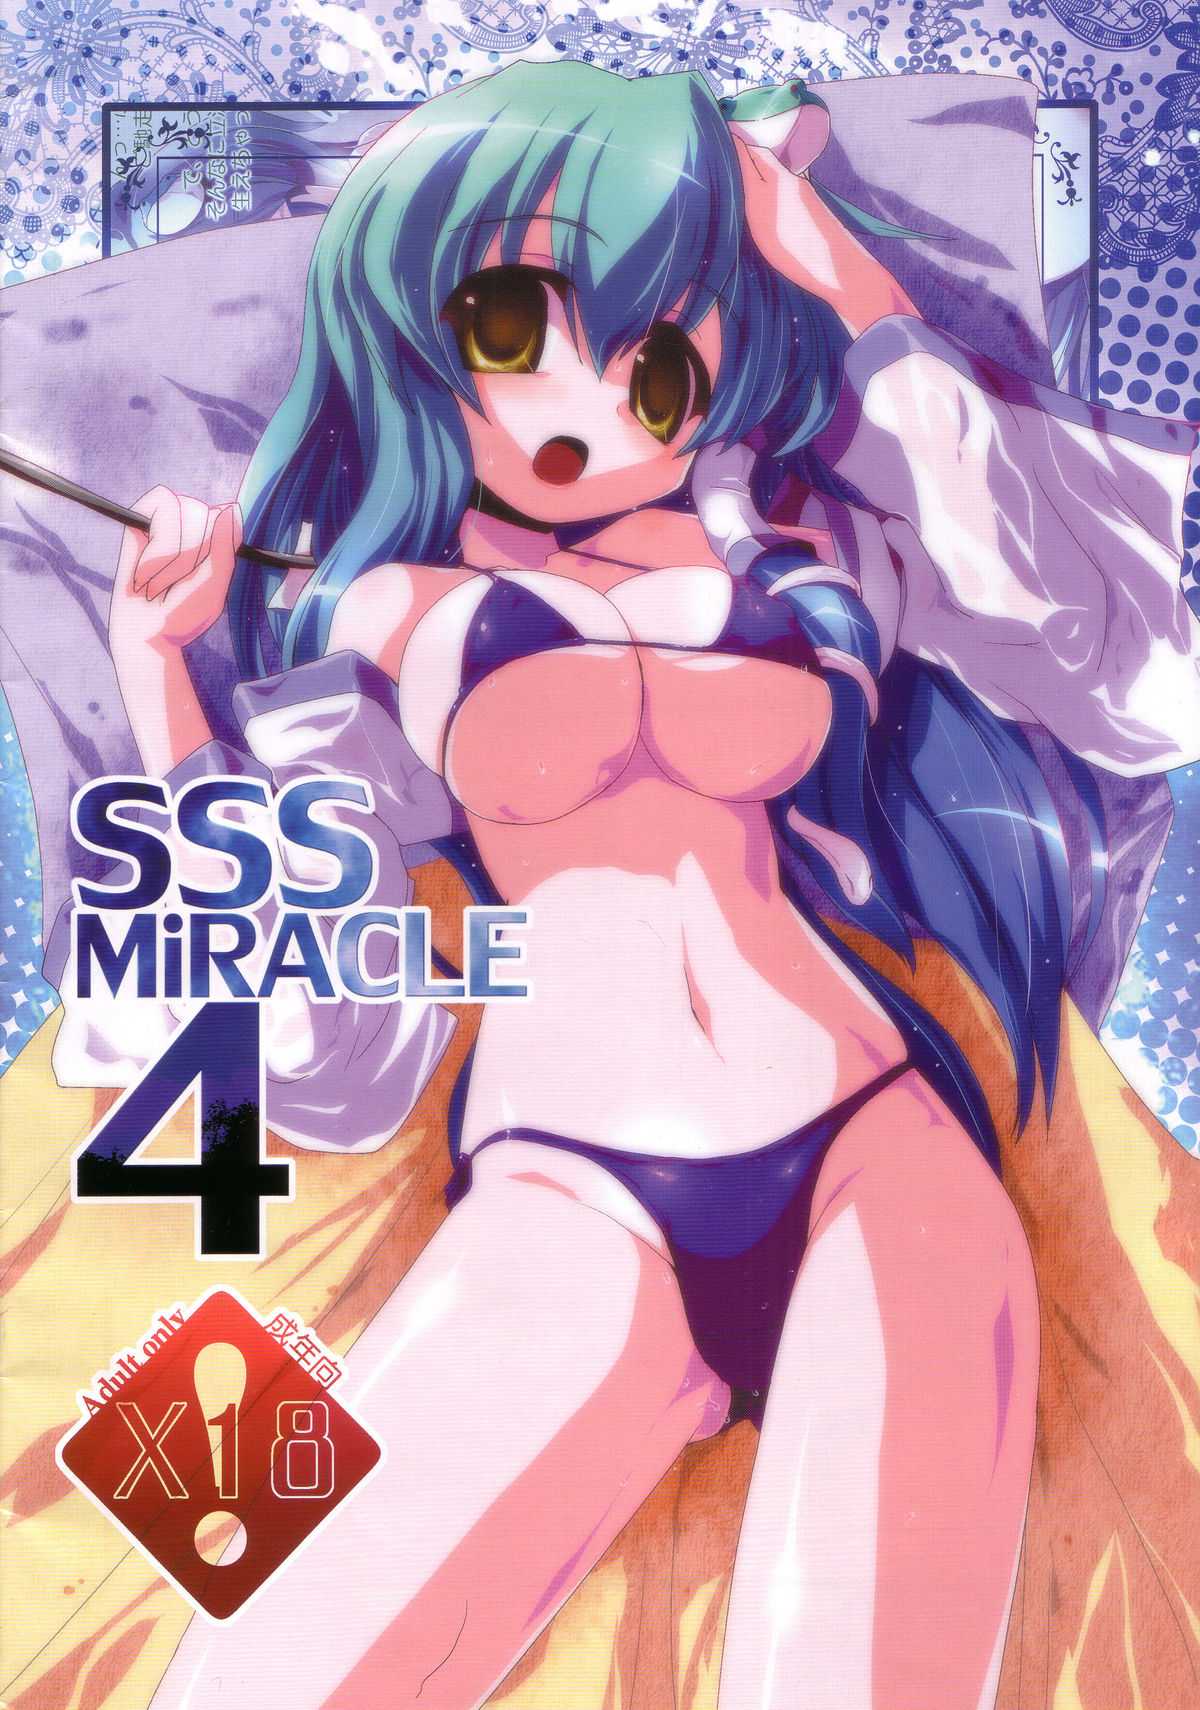 [MarineSapphire (Hasumi Milk)] SSS MiRACLE4 (Touhou Project) [海蒼玉 (はすみみるく)] SSS MiRACLE4  (東方Project)